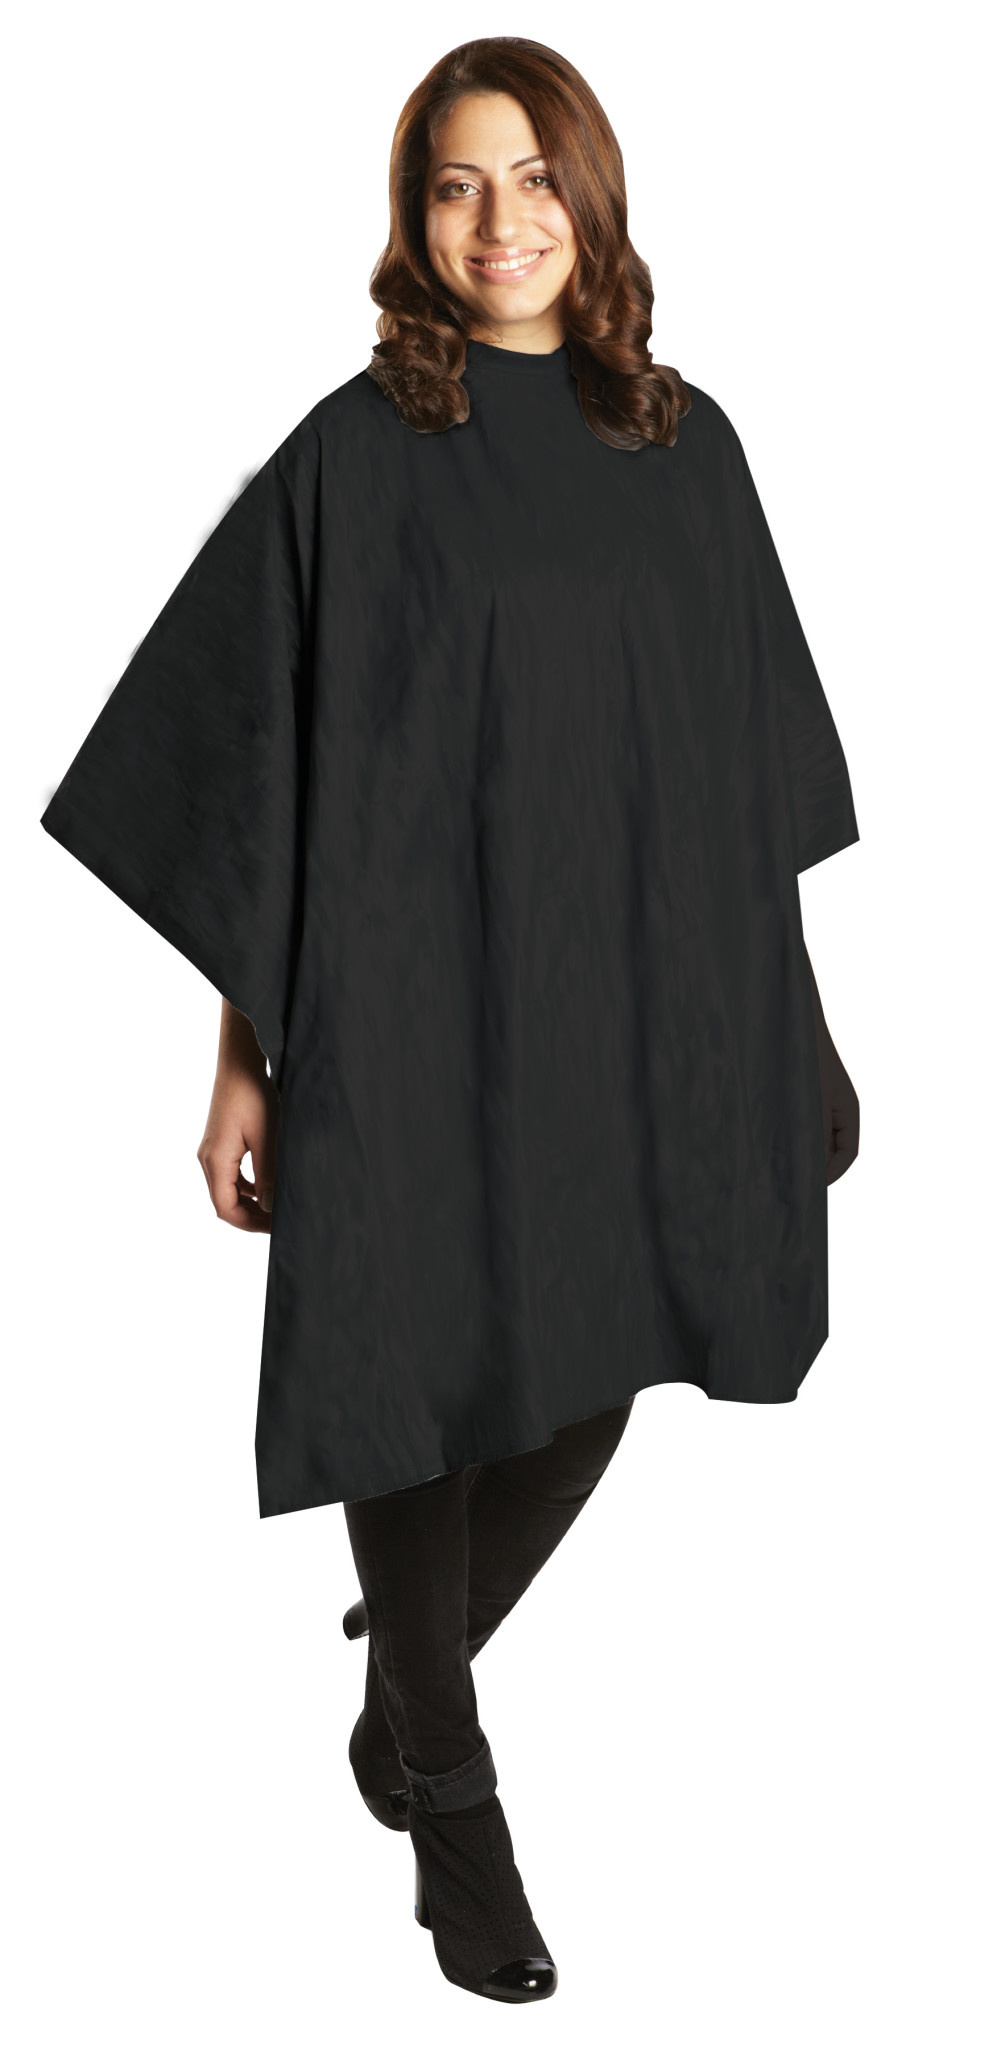 Extra-Large All-Purpose Waterproof Cape